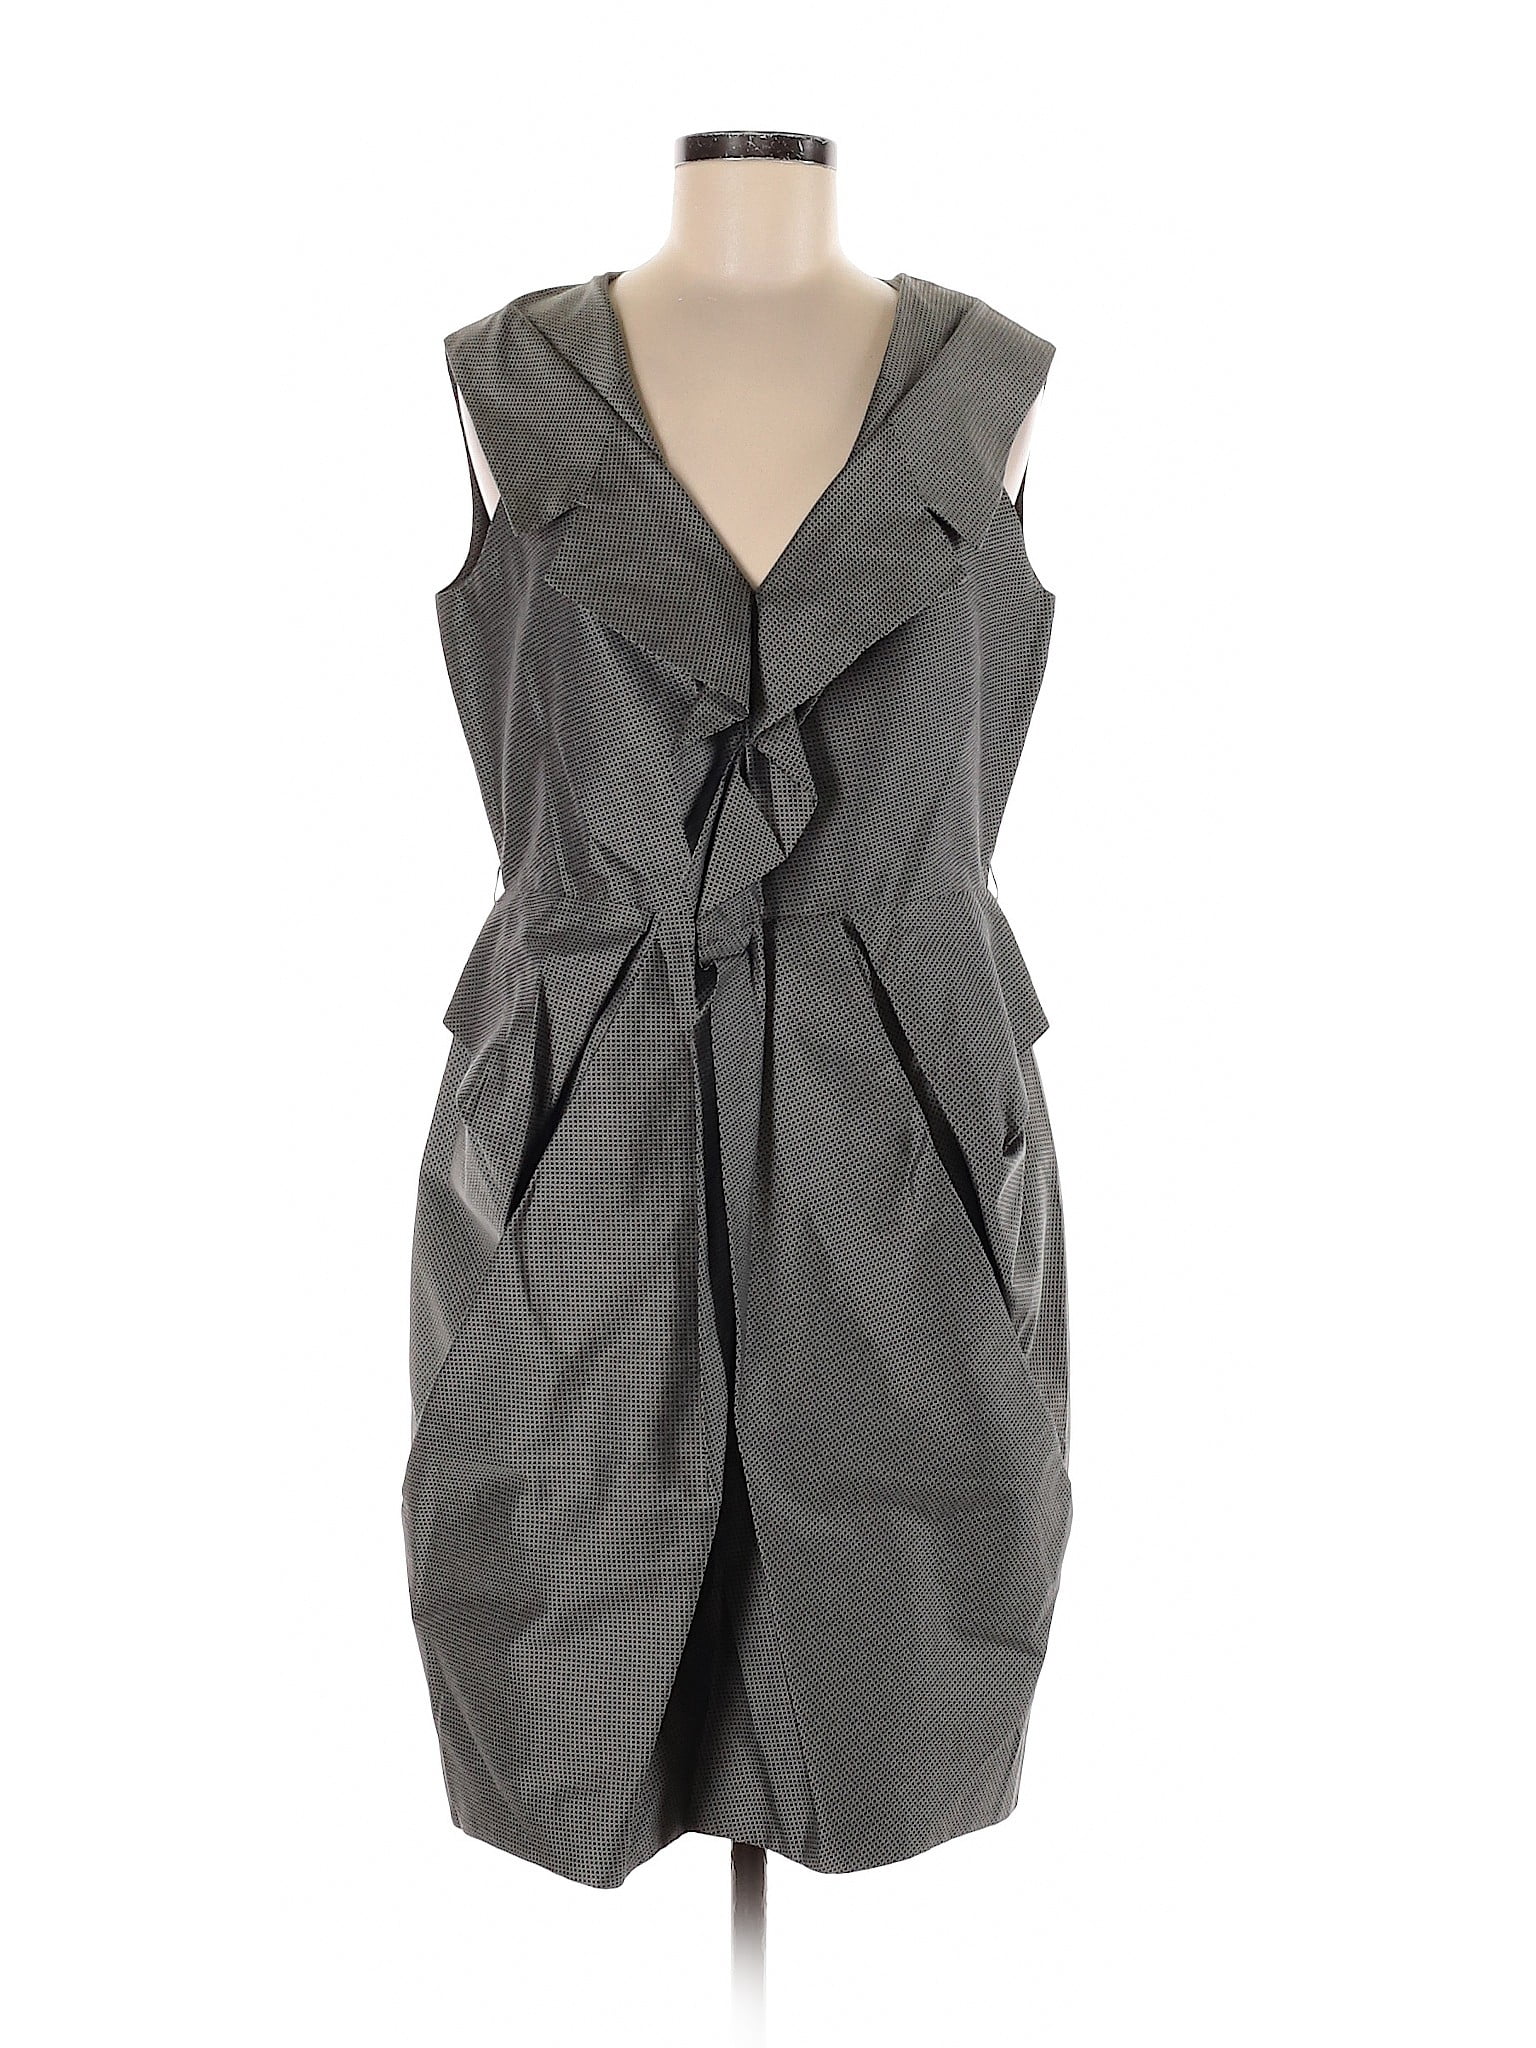 Lida Baday - Pre-Owned Lida Baday Women's Size 12 Cocktail Dress ...